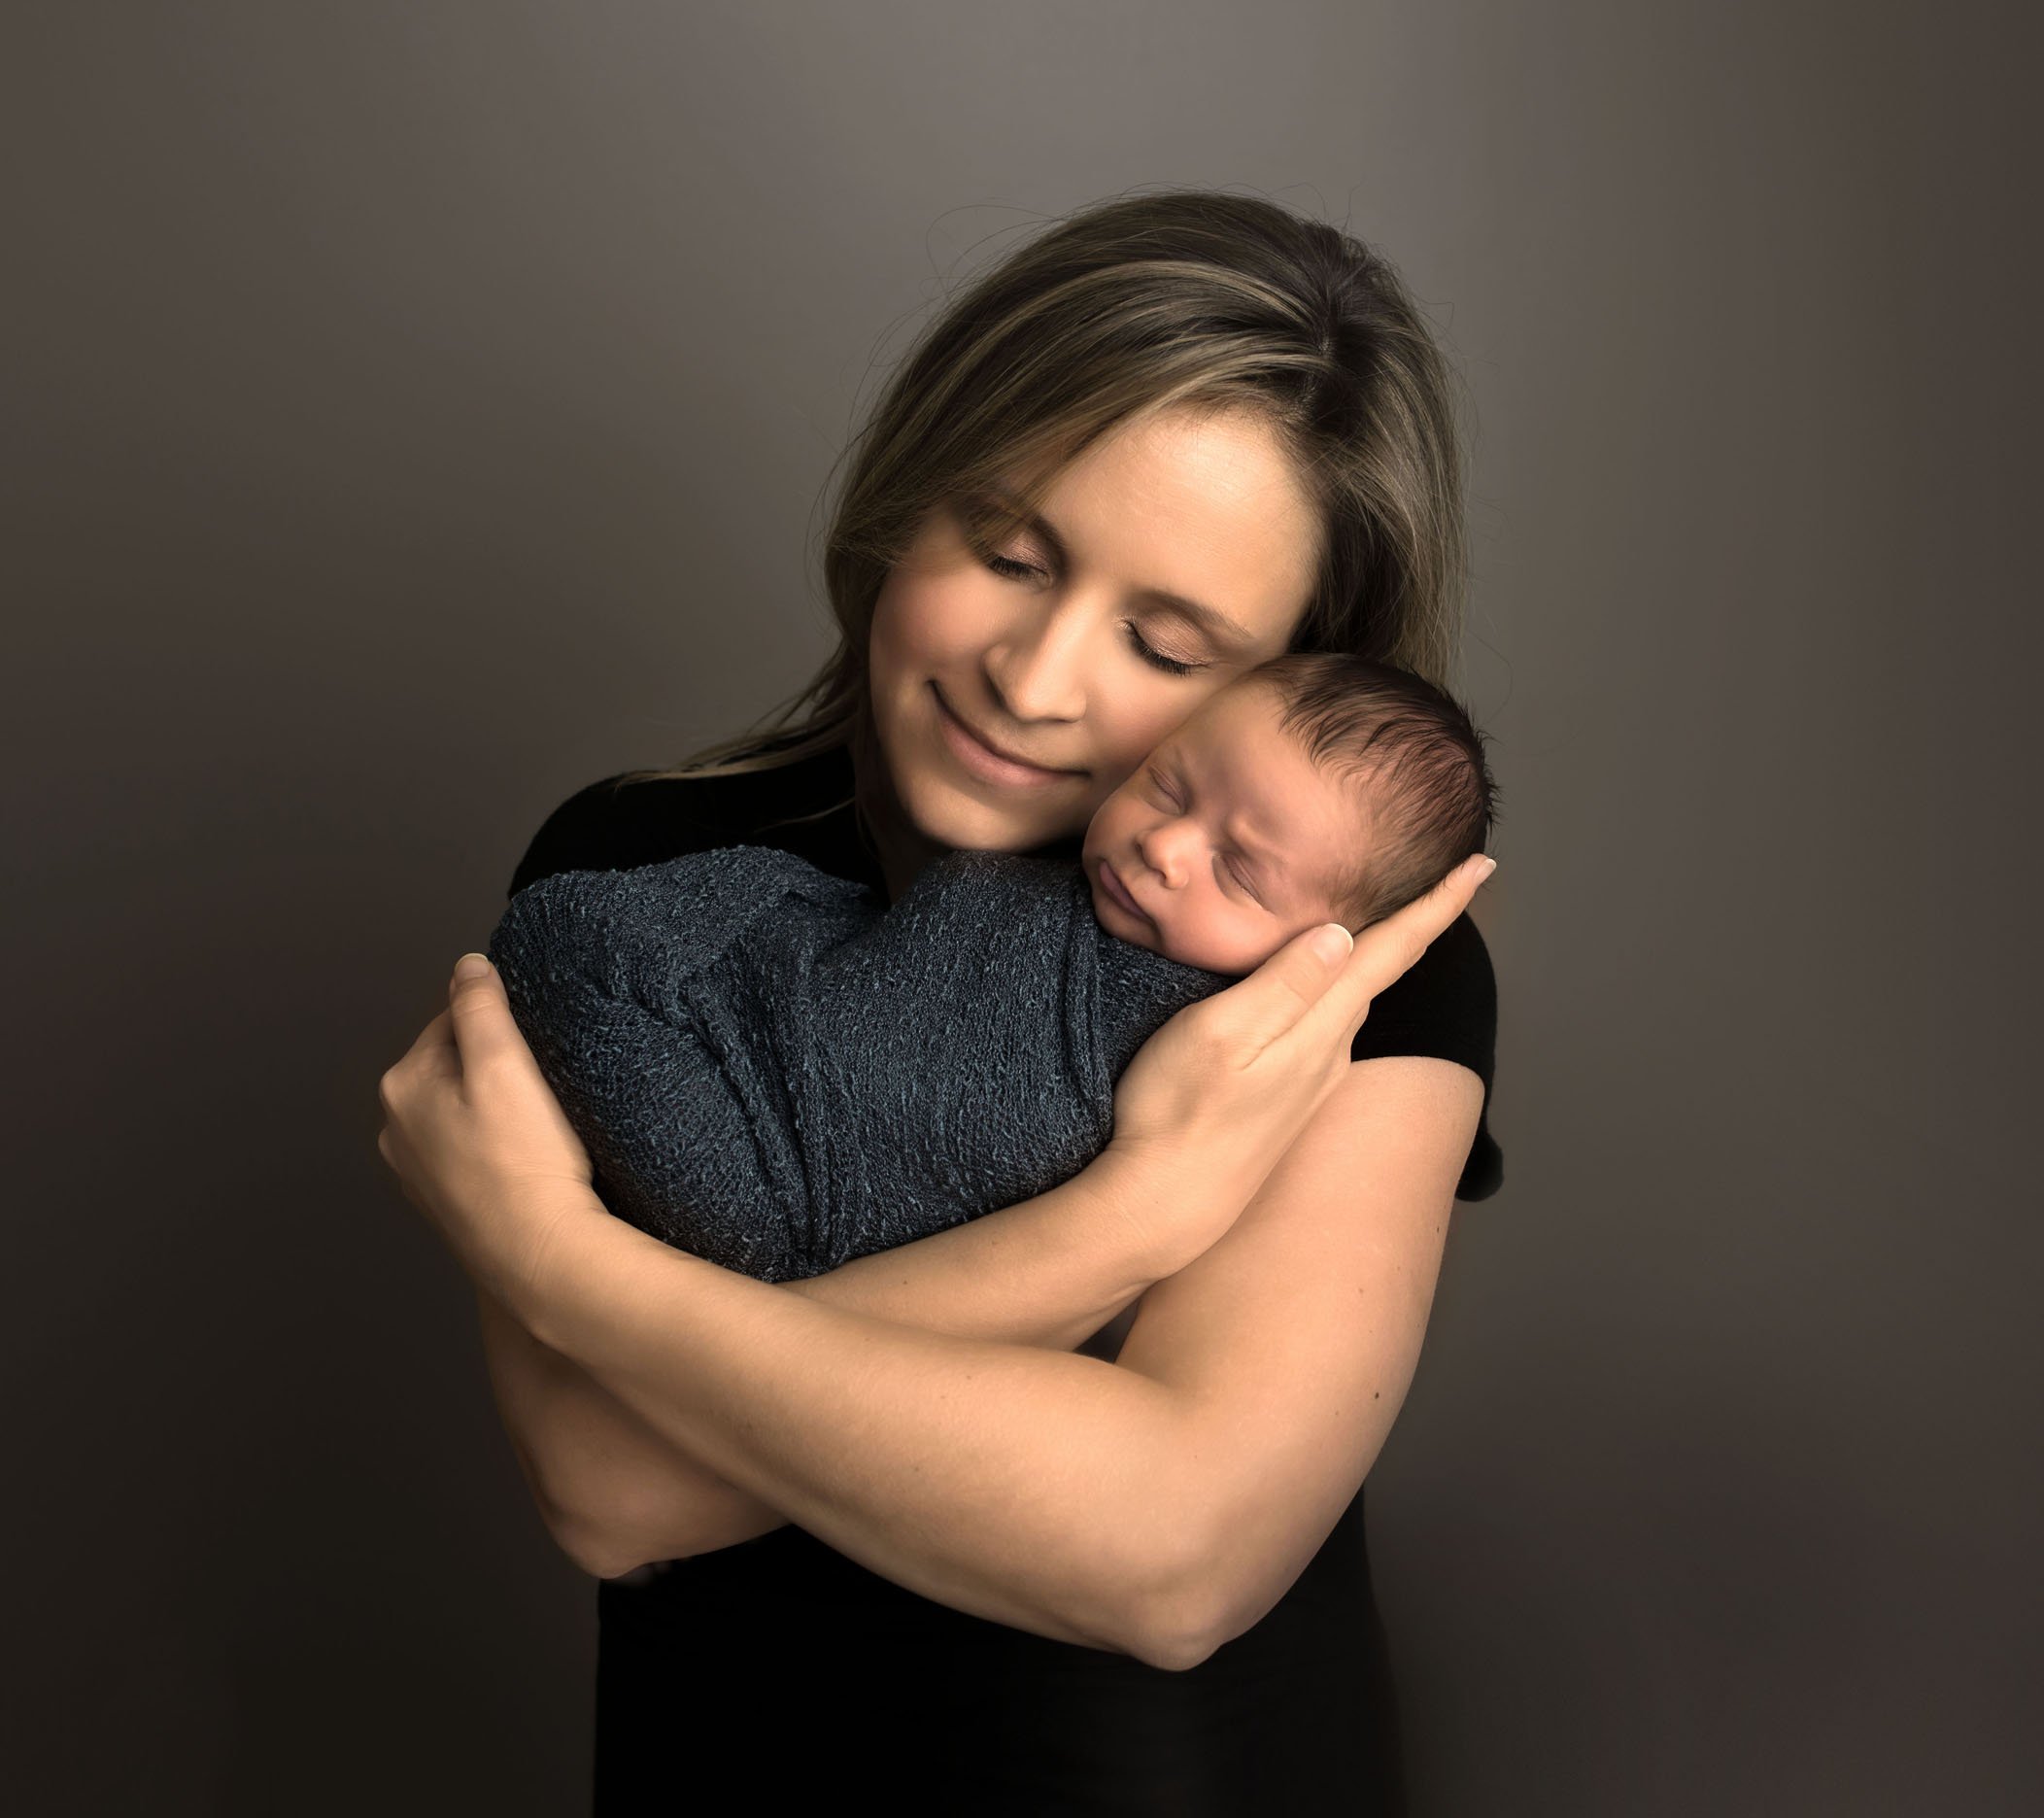 Mom cradles newborn in her arms with eyes closed and smile One Big Happy Photo